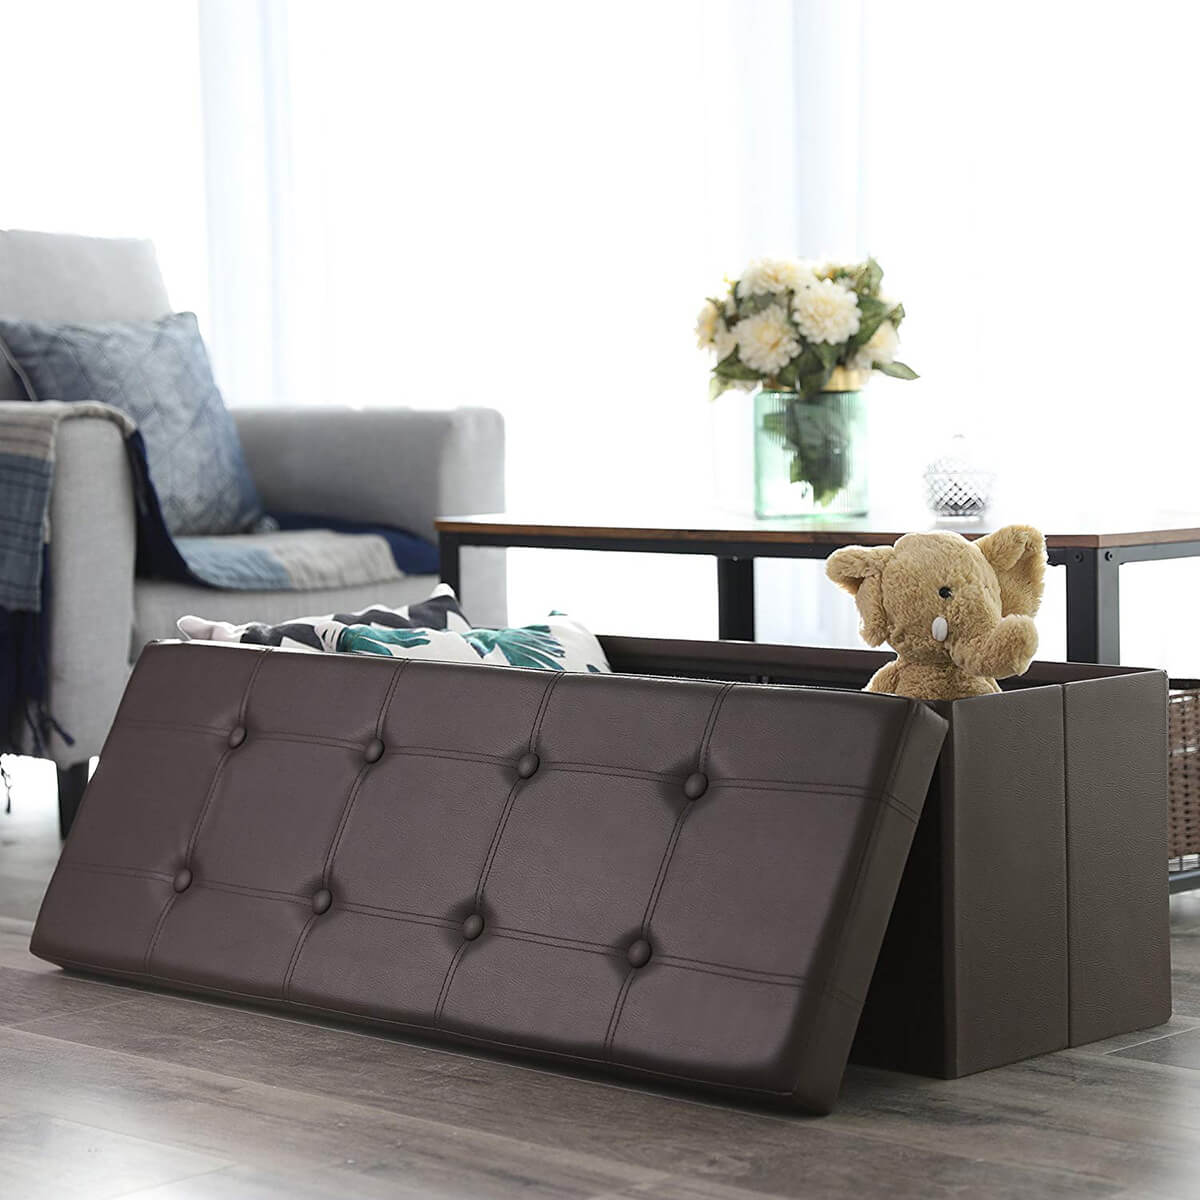 Folding Storage Ottoman Bench in Faux Leather